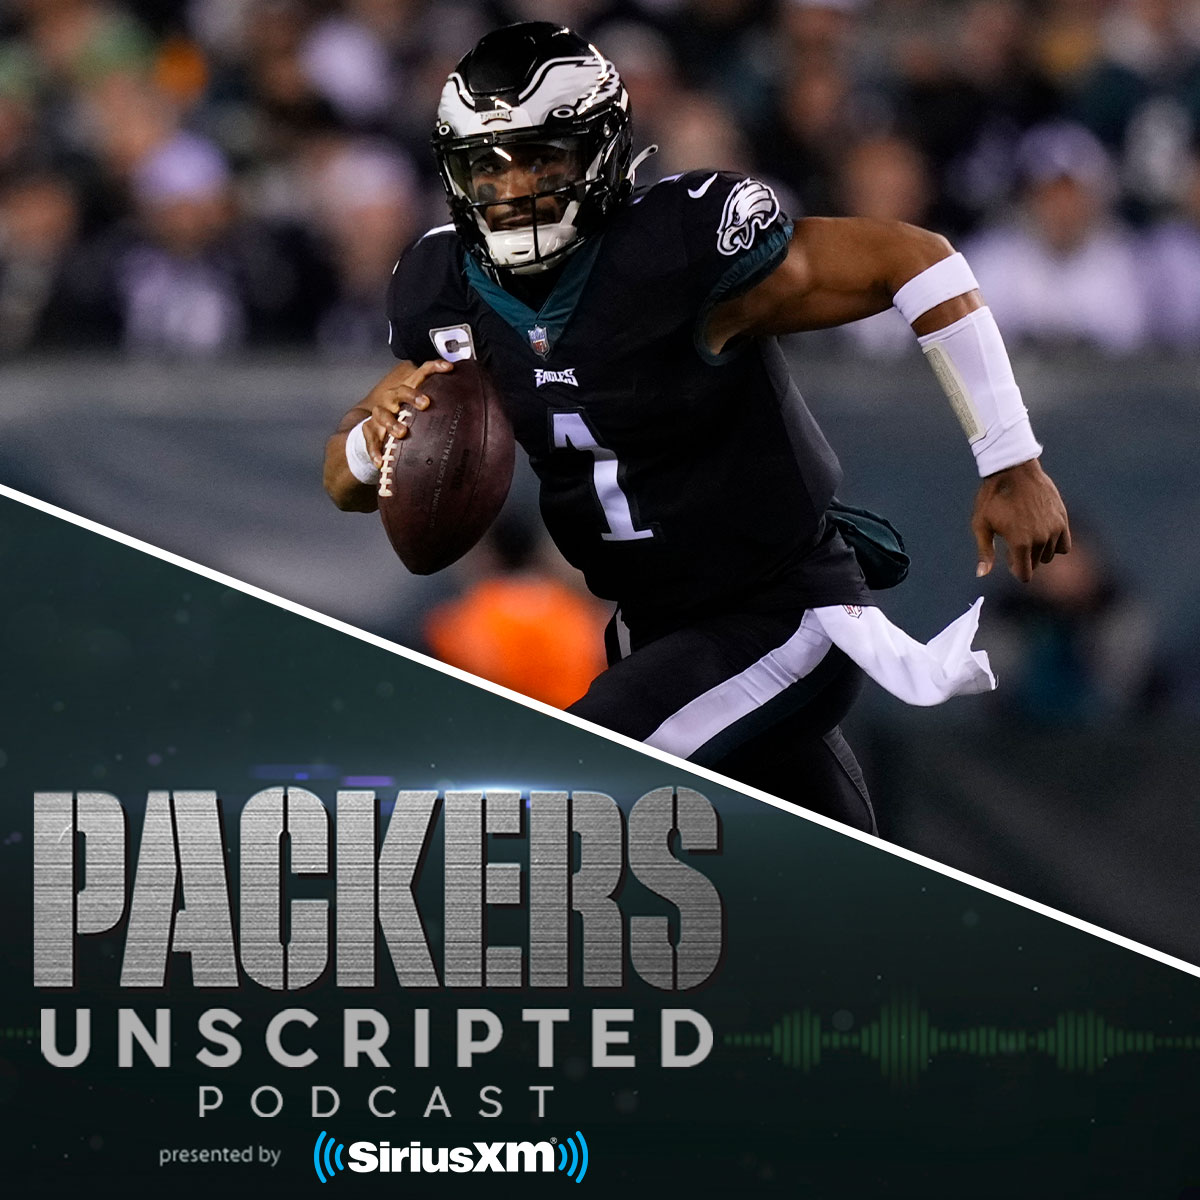 #688 Packers Unscripted: Problems in Philly